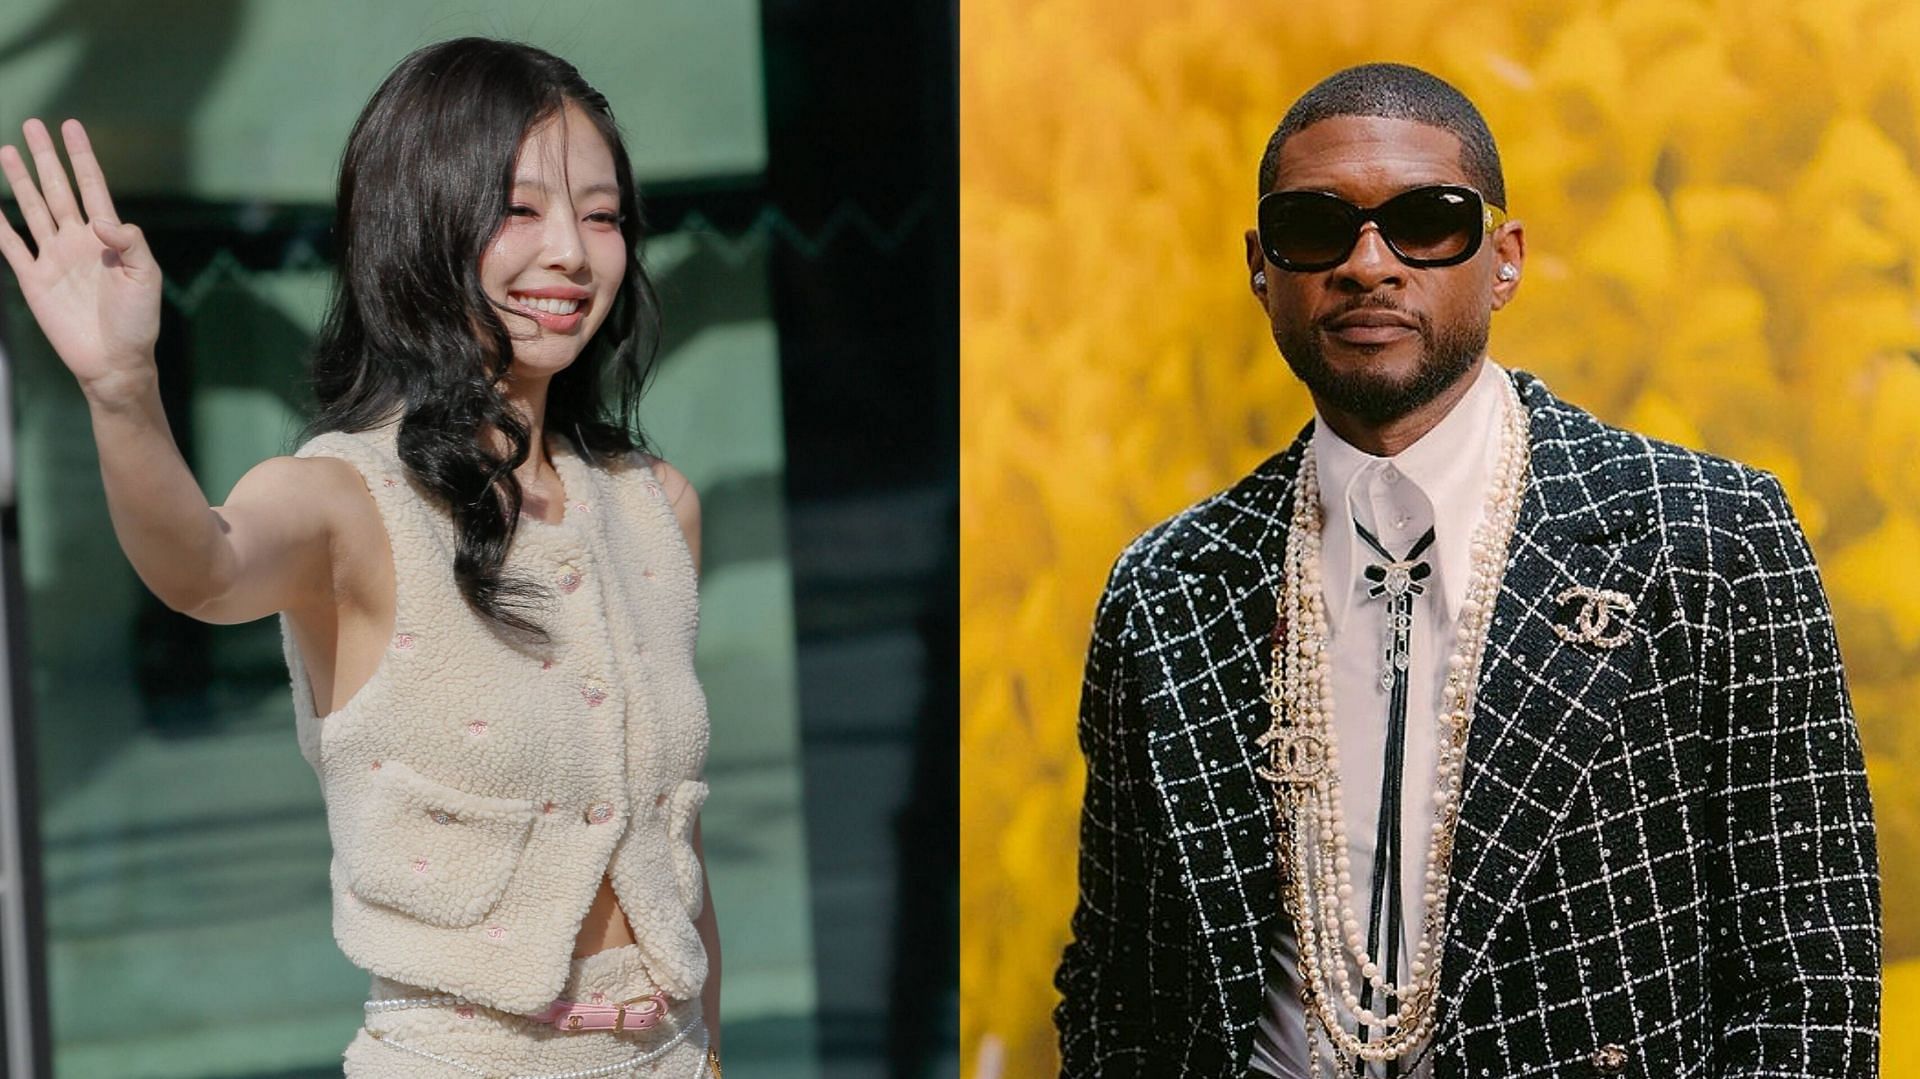 IT'S HAPPENING: BLACKPINK's Jennie and Usher's interaction at